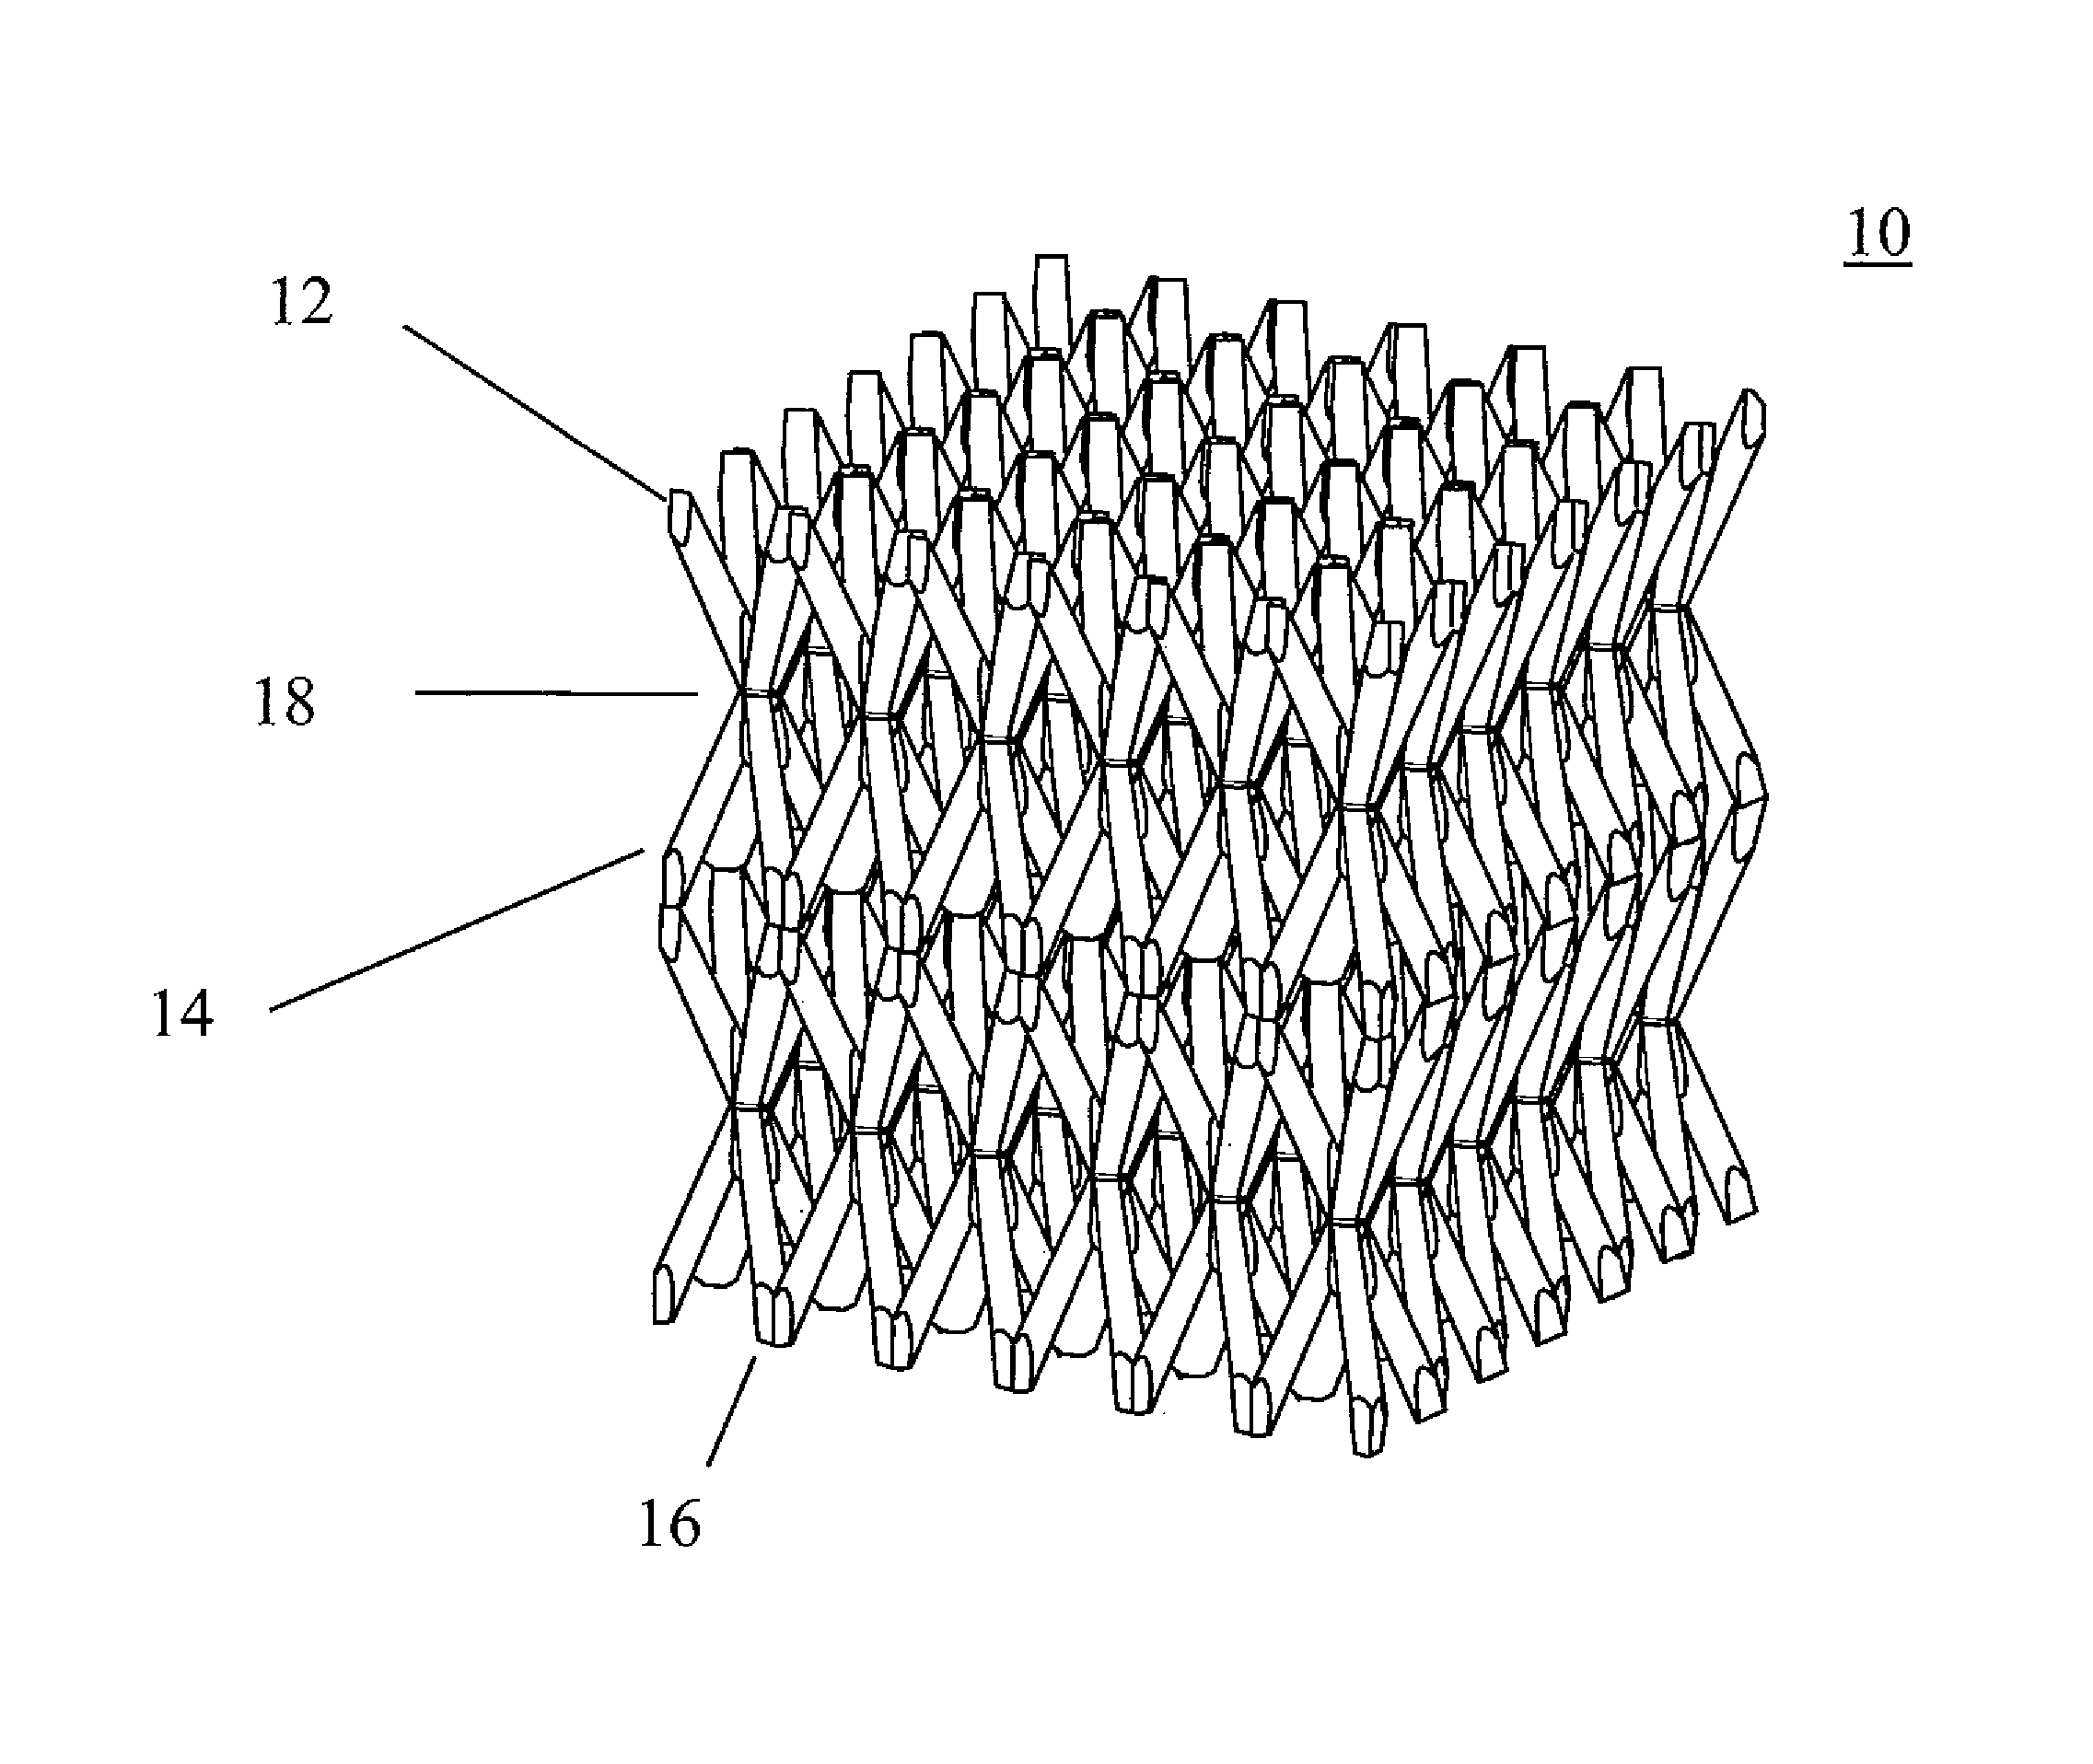 Micro-truss based composite friction-and-wear apparatus and methods of manufacturing the same